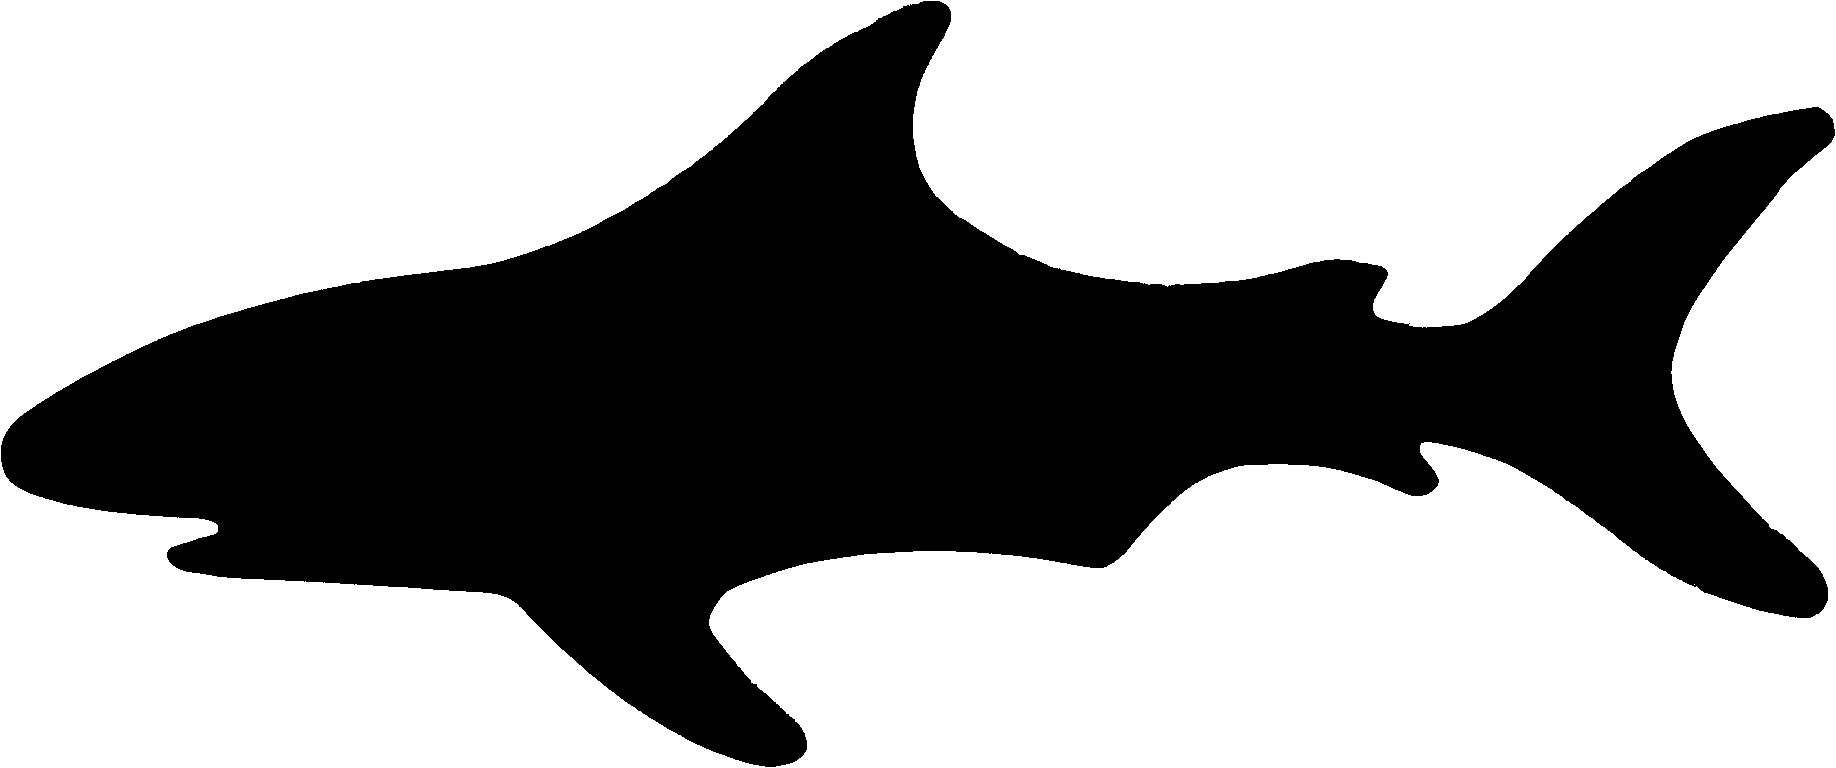 Shark clip art black and white free clipart images 5